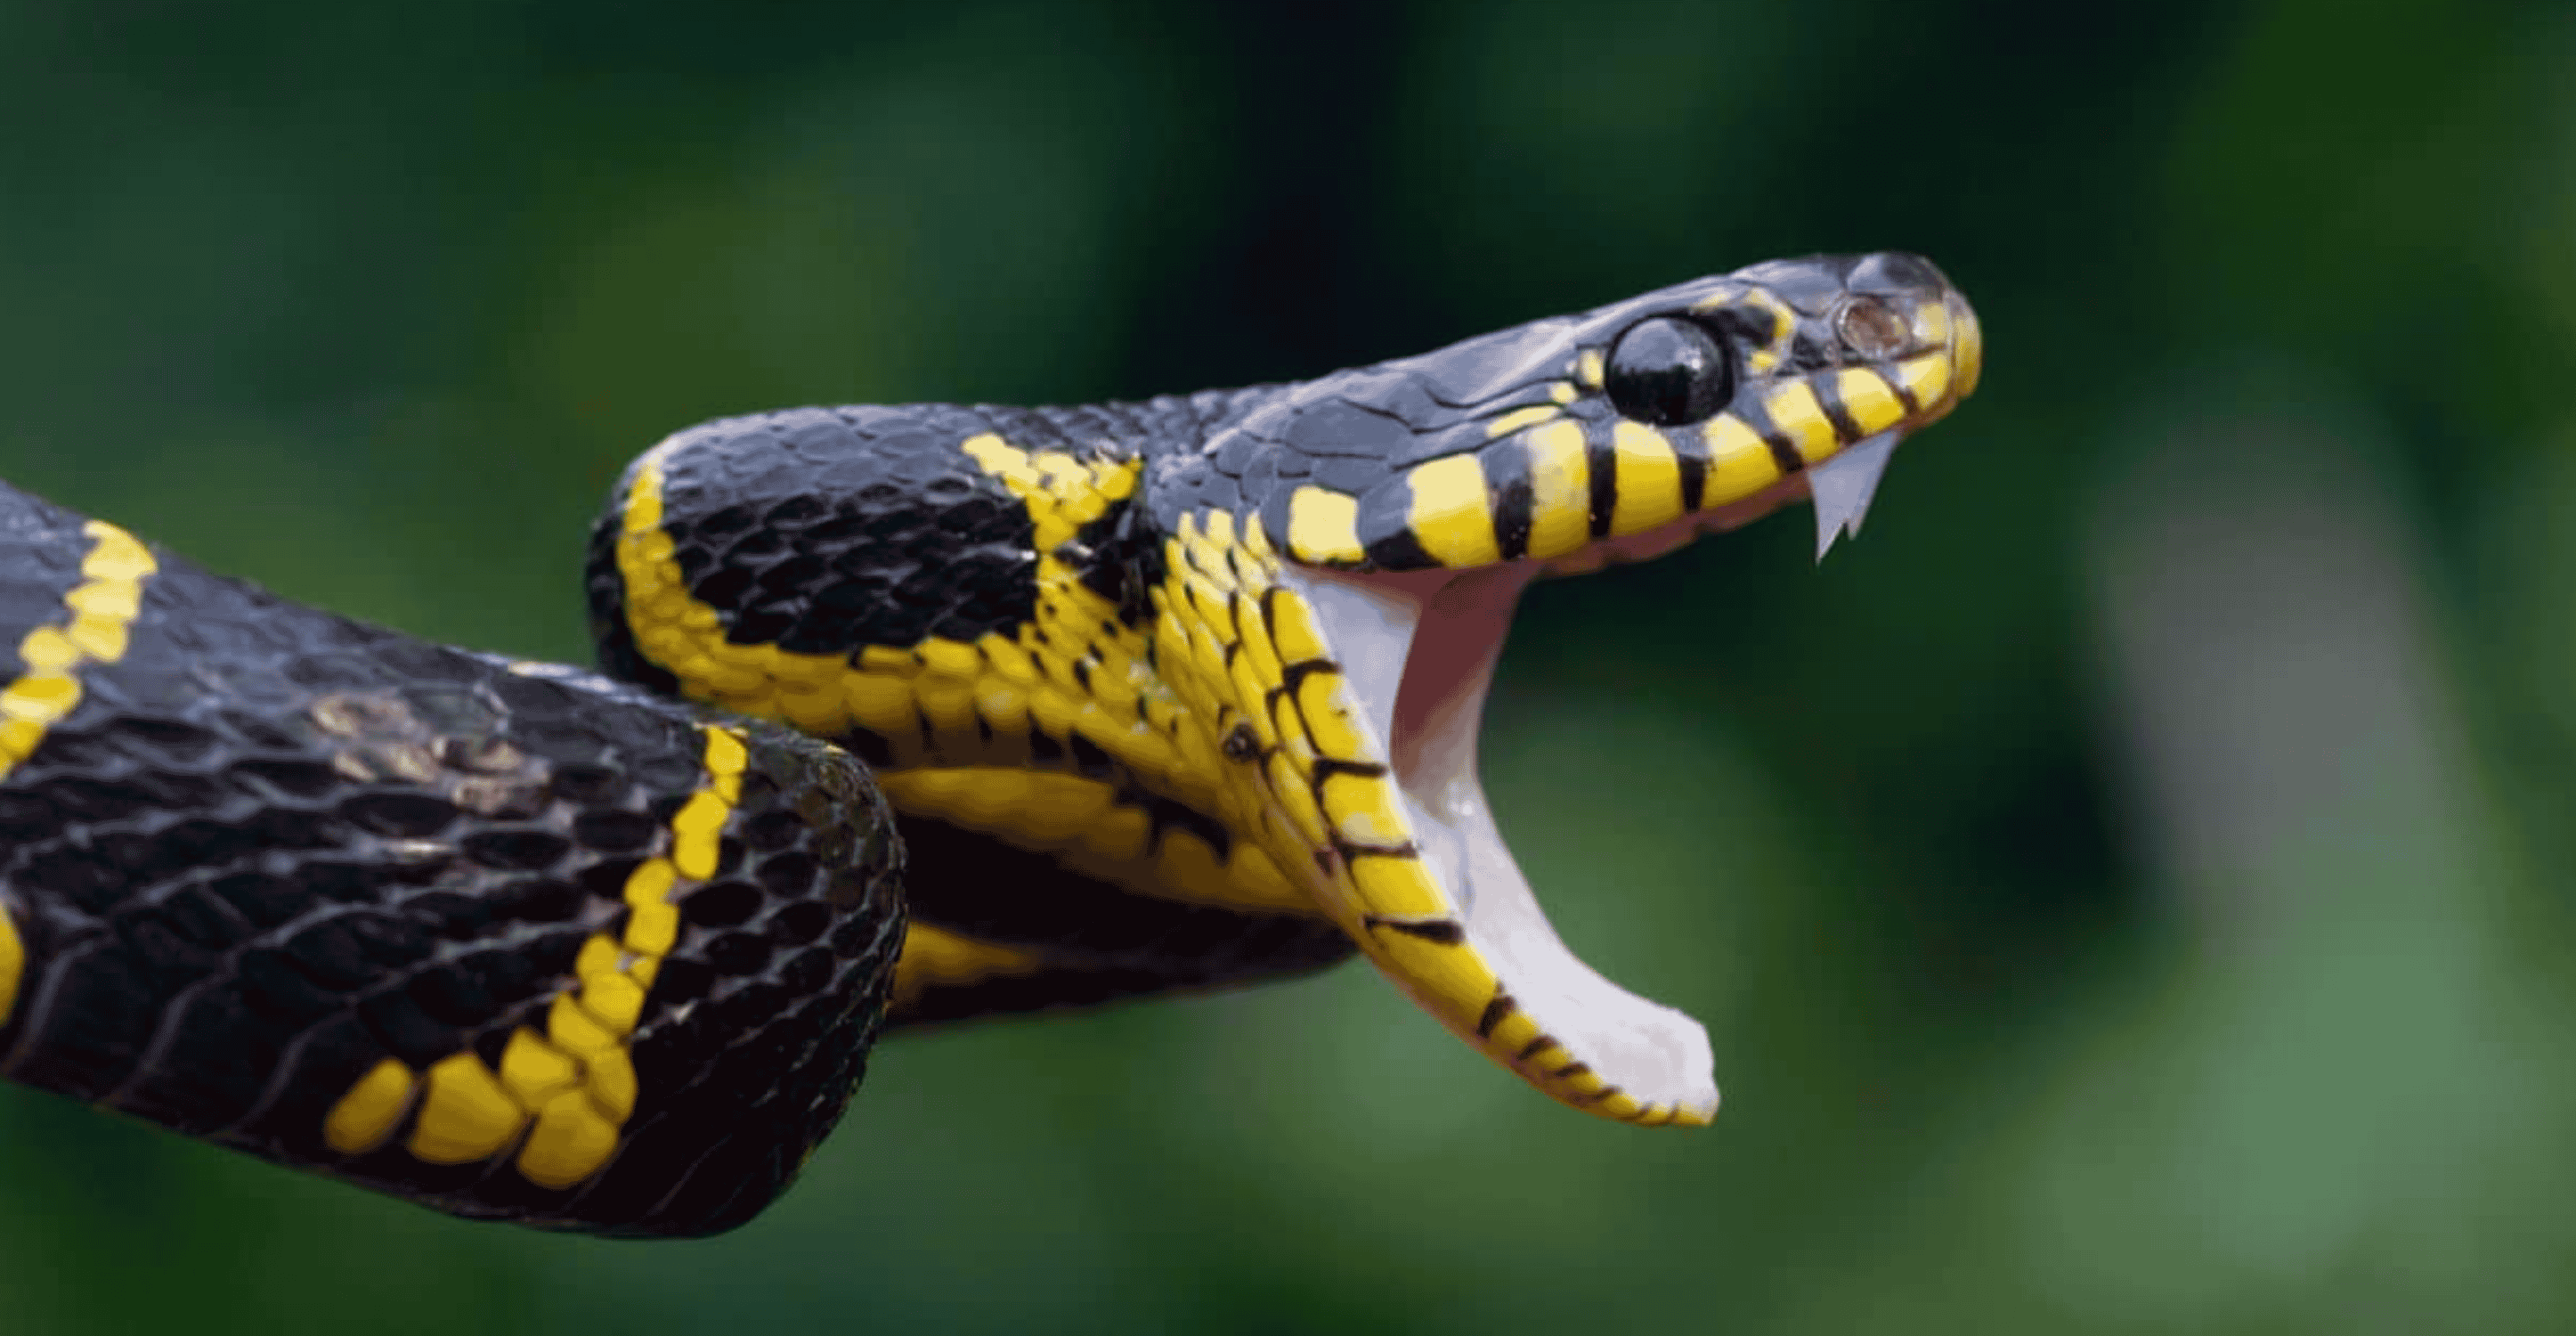 How Many Teeth Does A Snake Have?